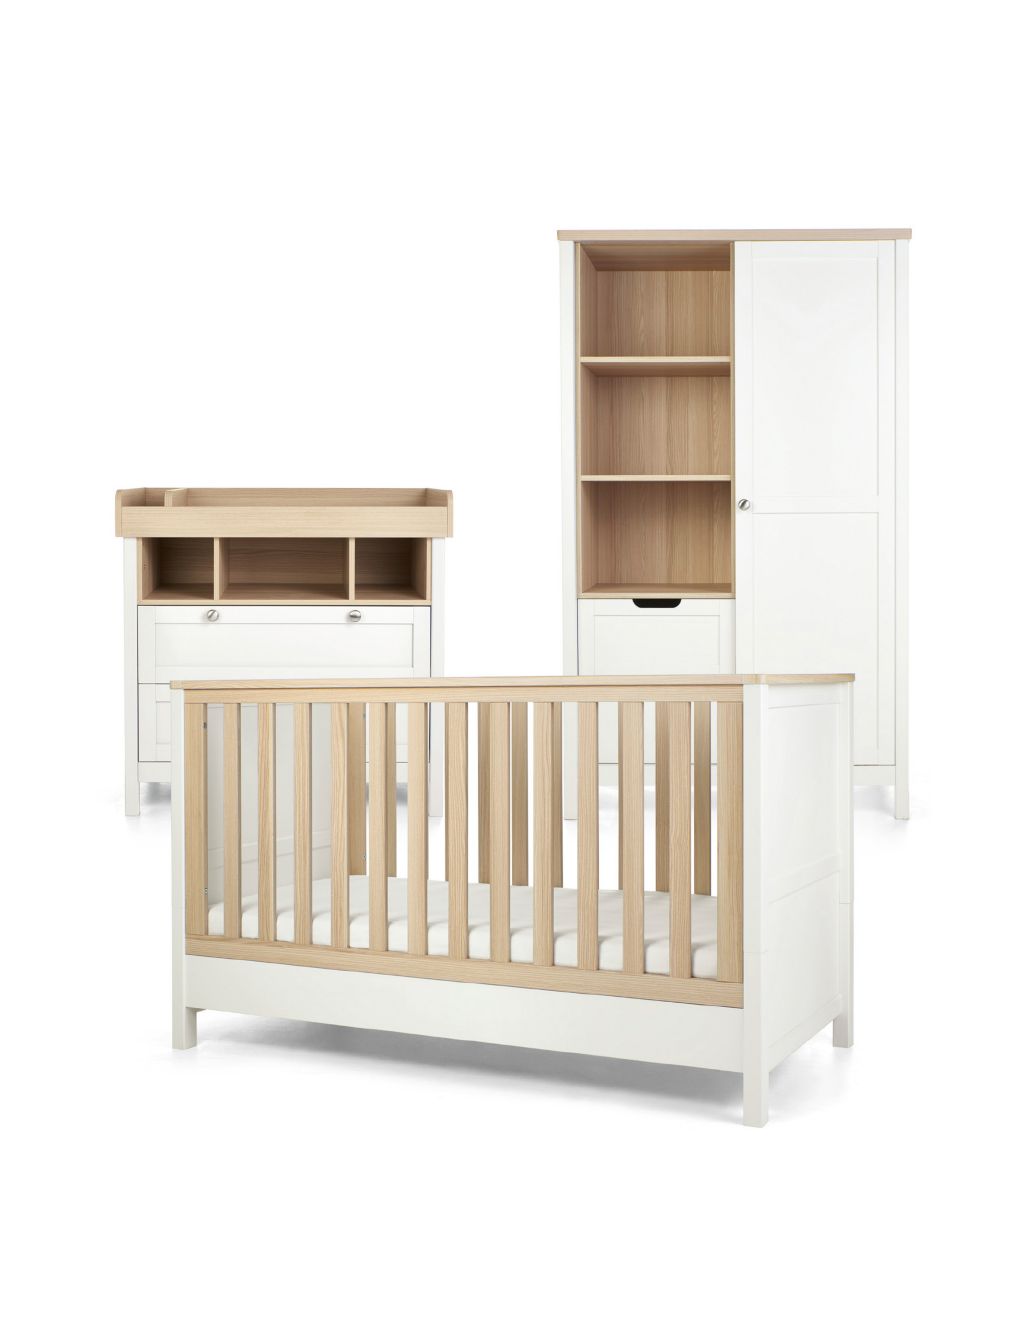 Harwell 3 Piece Cotbed Range with Dresser and Wardrobe